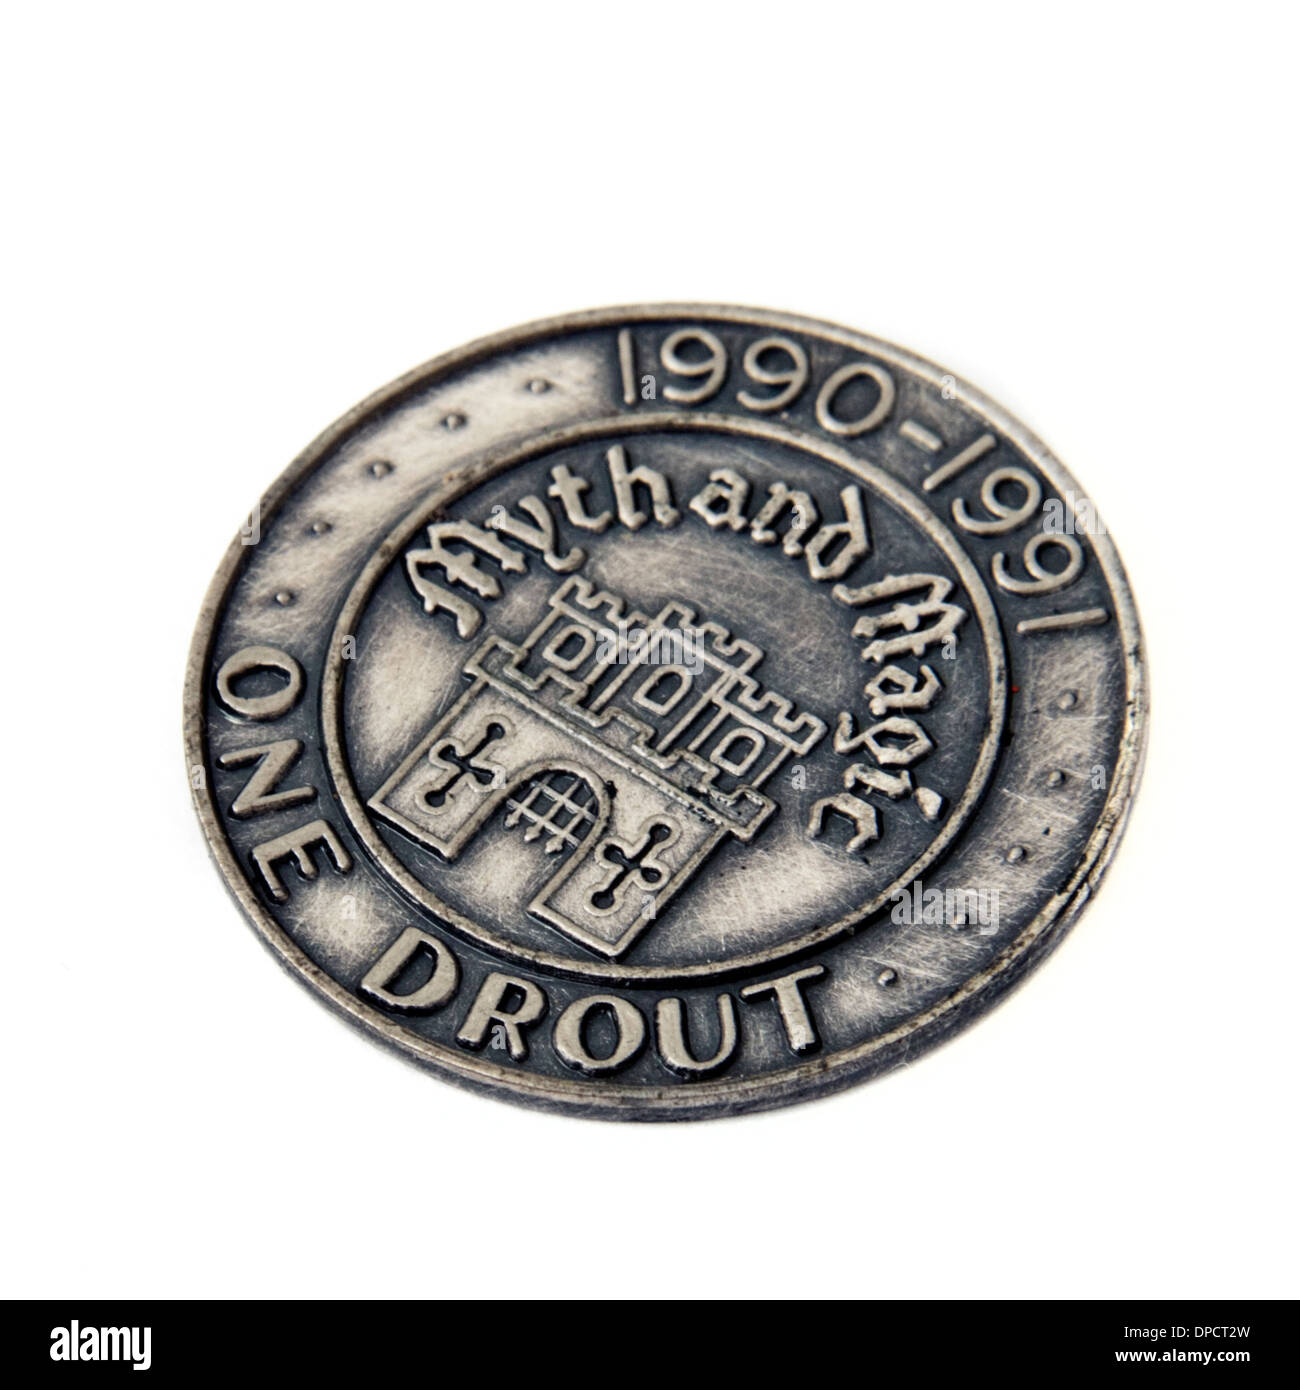 Myth and Magic 'One Drout' collectible coin by The Tudor Mint (Watson Group) from 1990-1991 Stock Photo